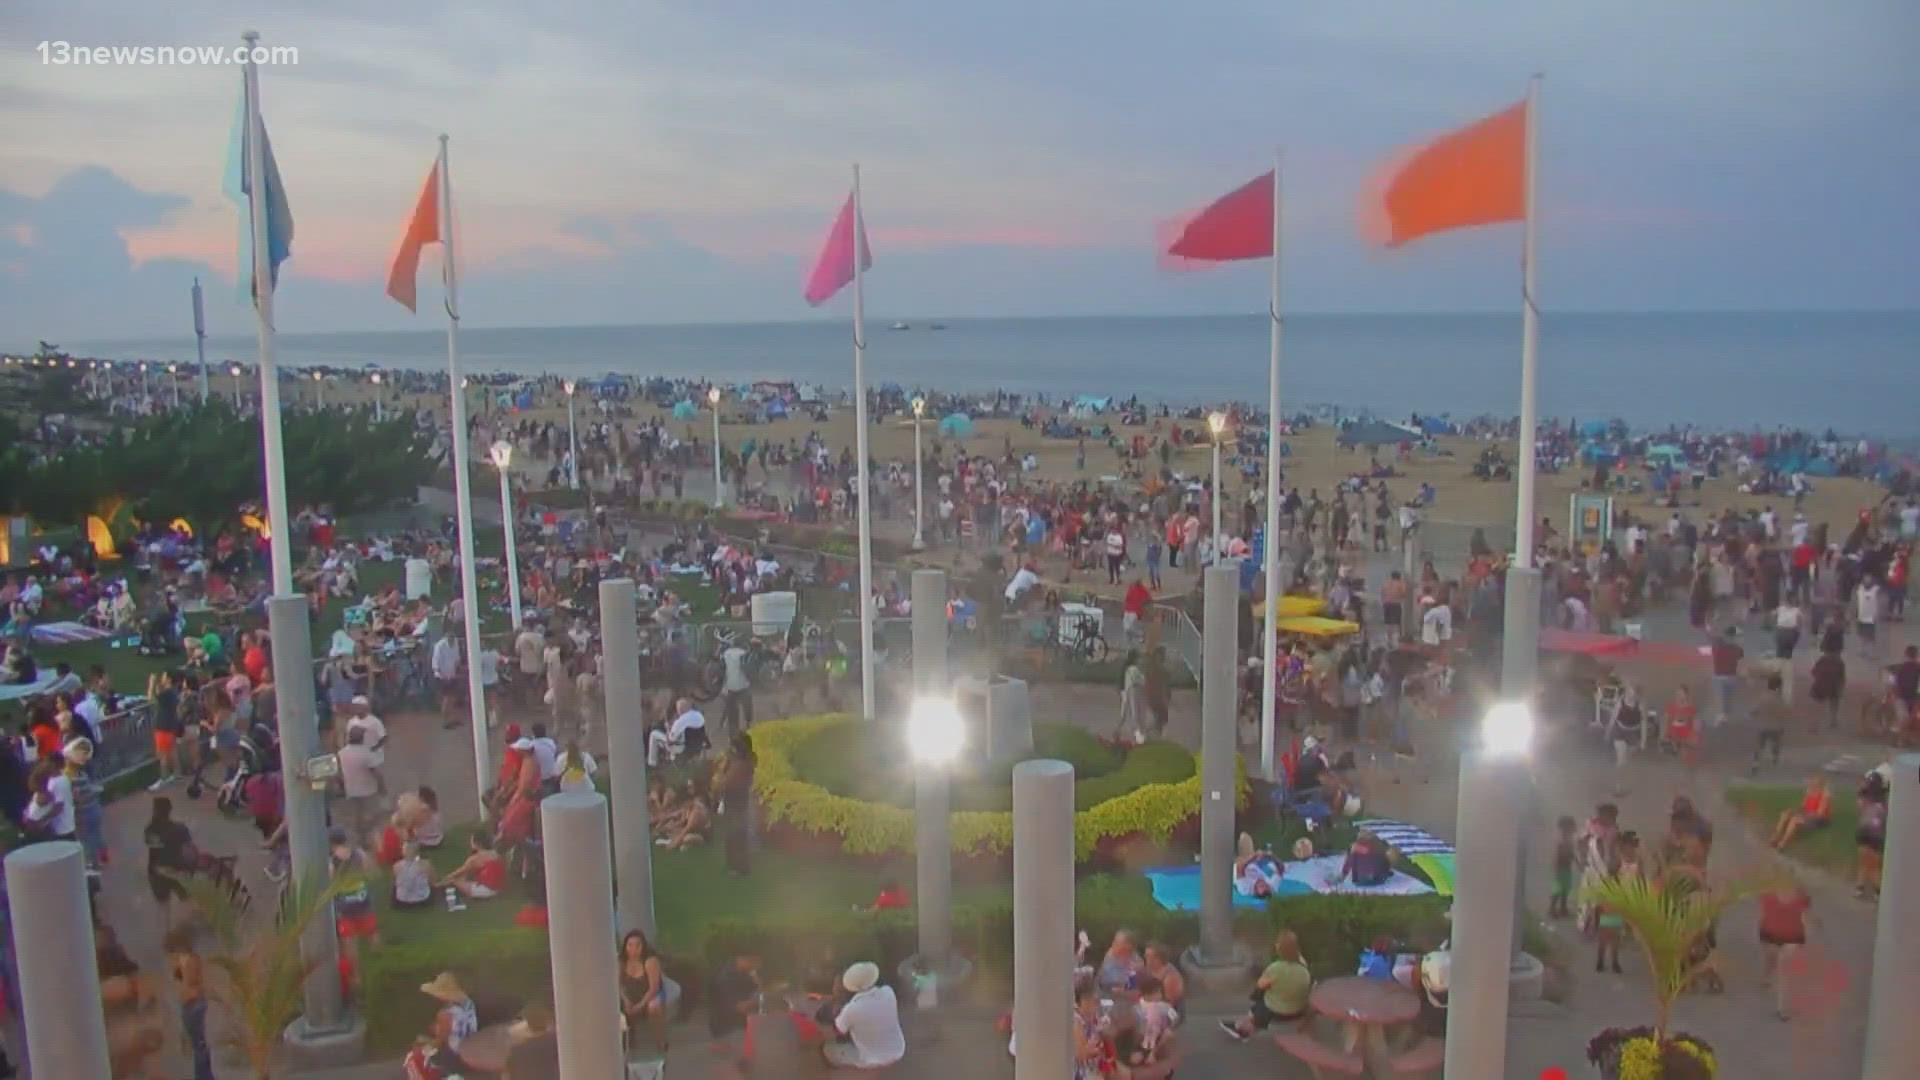 It's almost festival season in Virginia Beach! That means thousands of people will hit the Oceanfront starting in April.